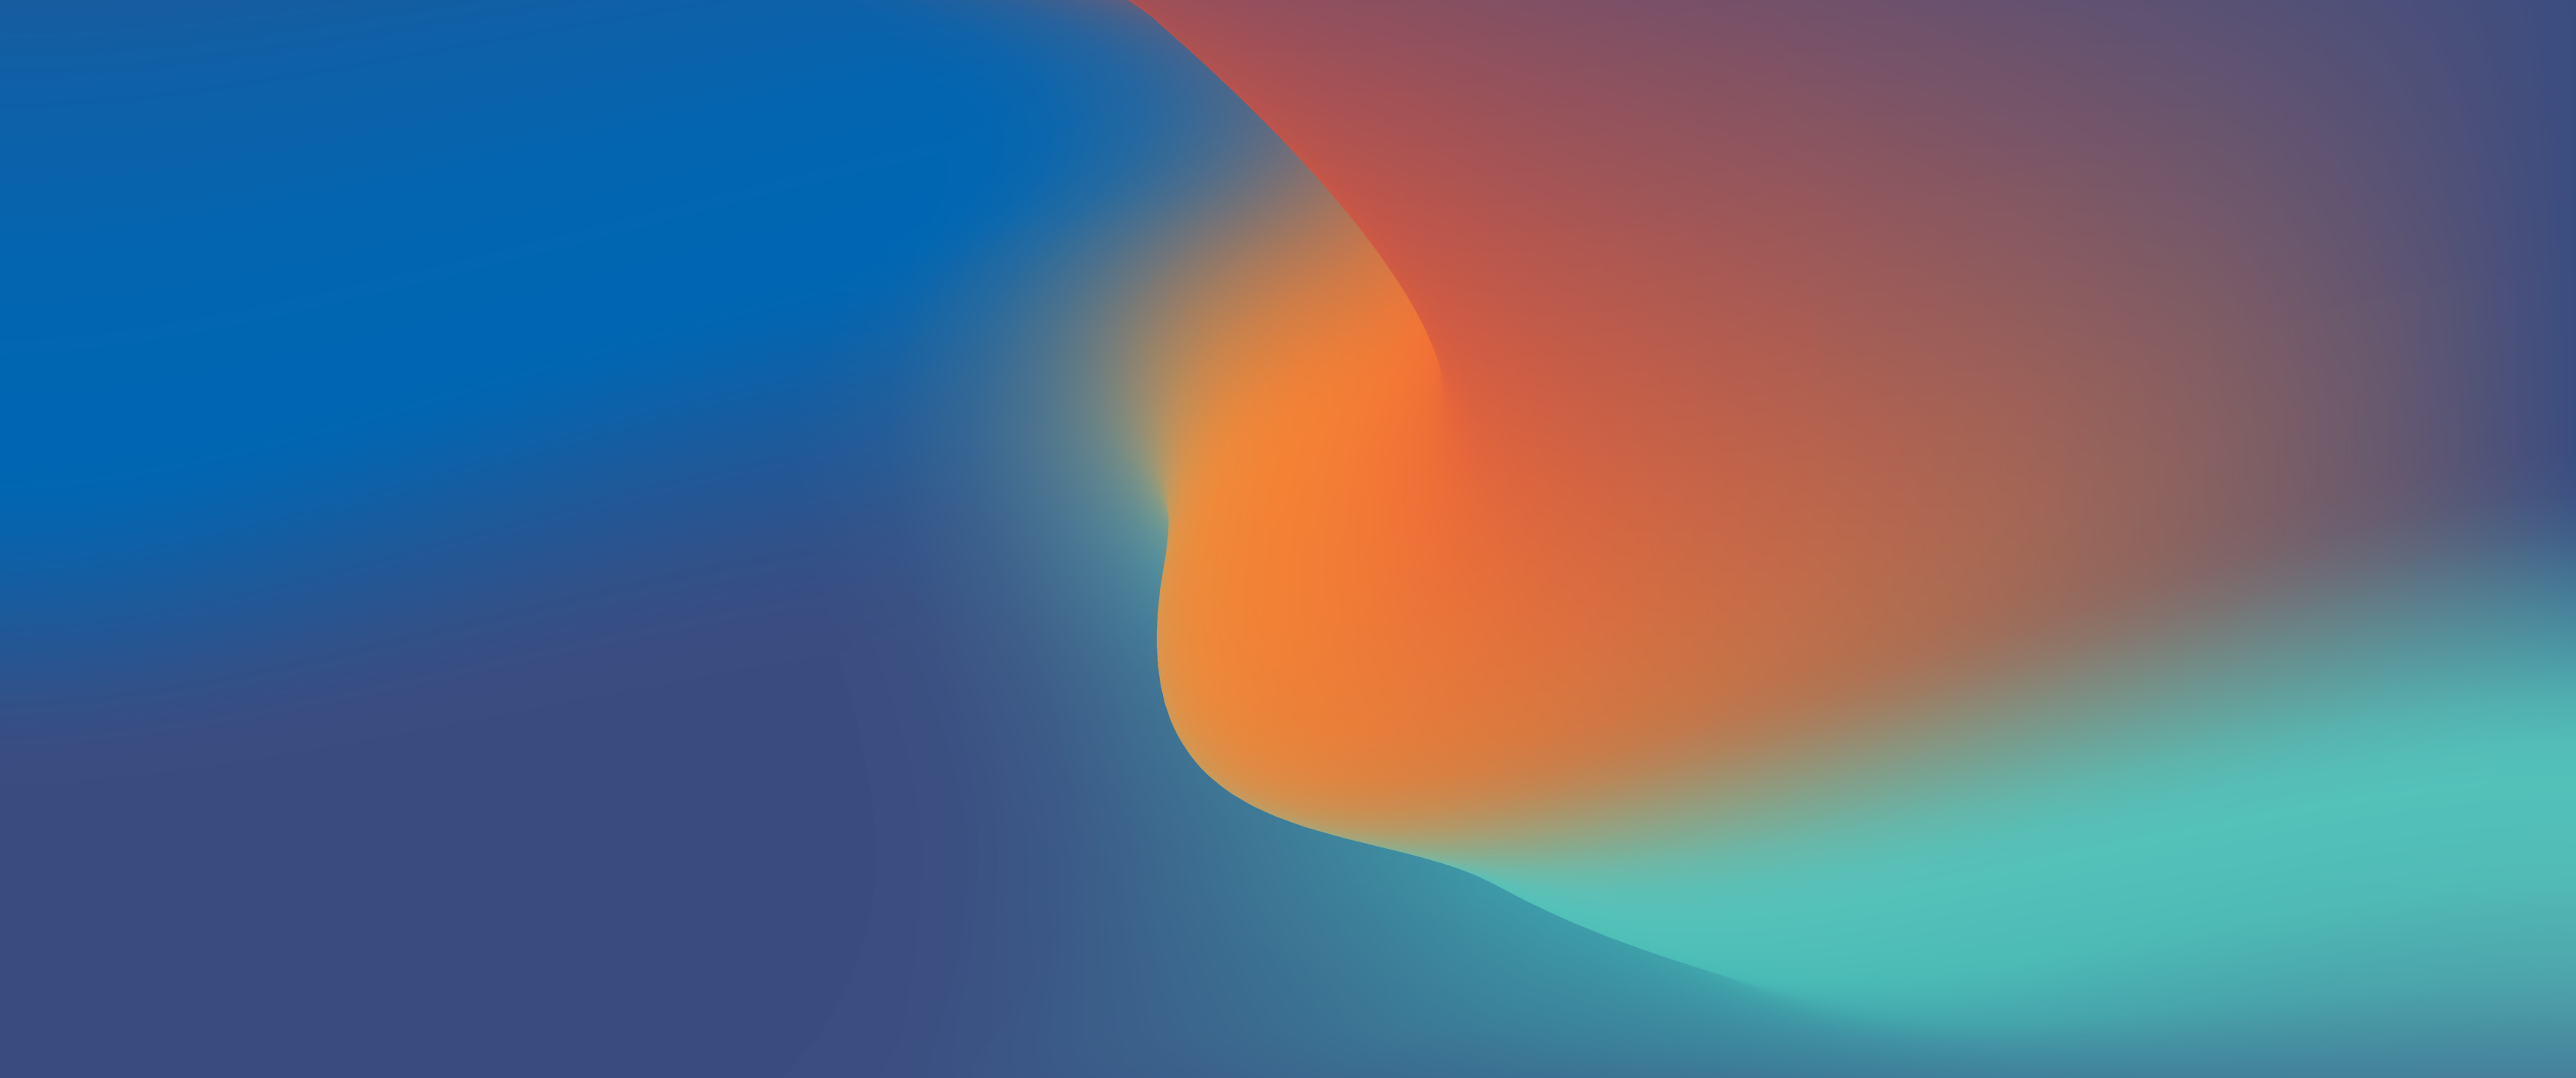 3440x1440 Abstract Colors 8k Gradient Art 3440x1440 Resolution ...